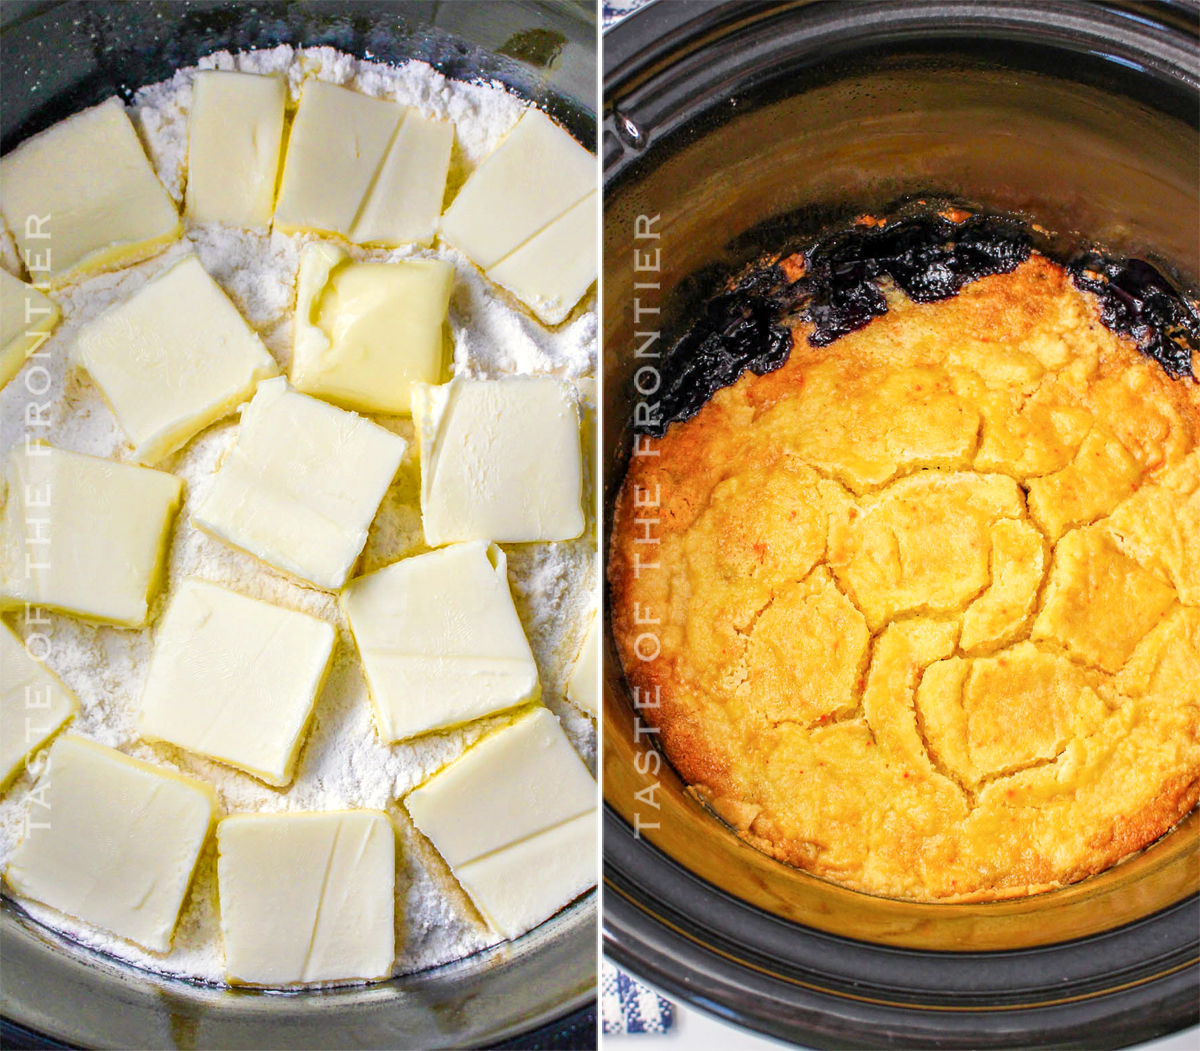 How to Make Slow Cooker Blueberry Cobbler